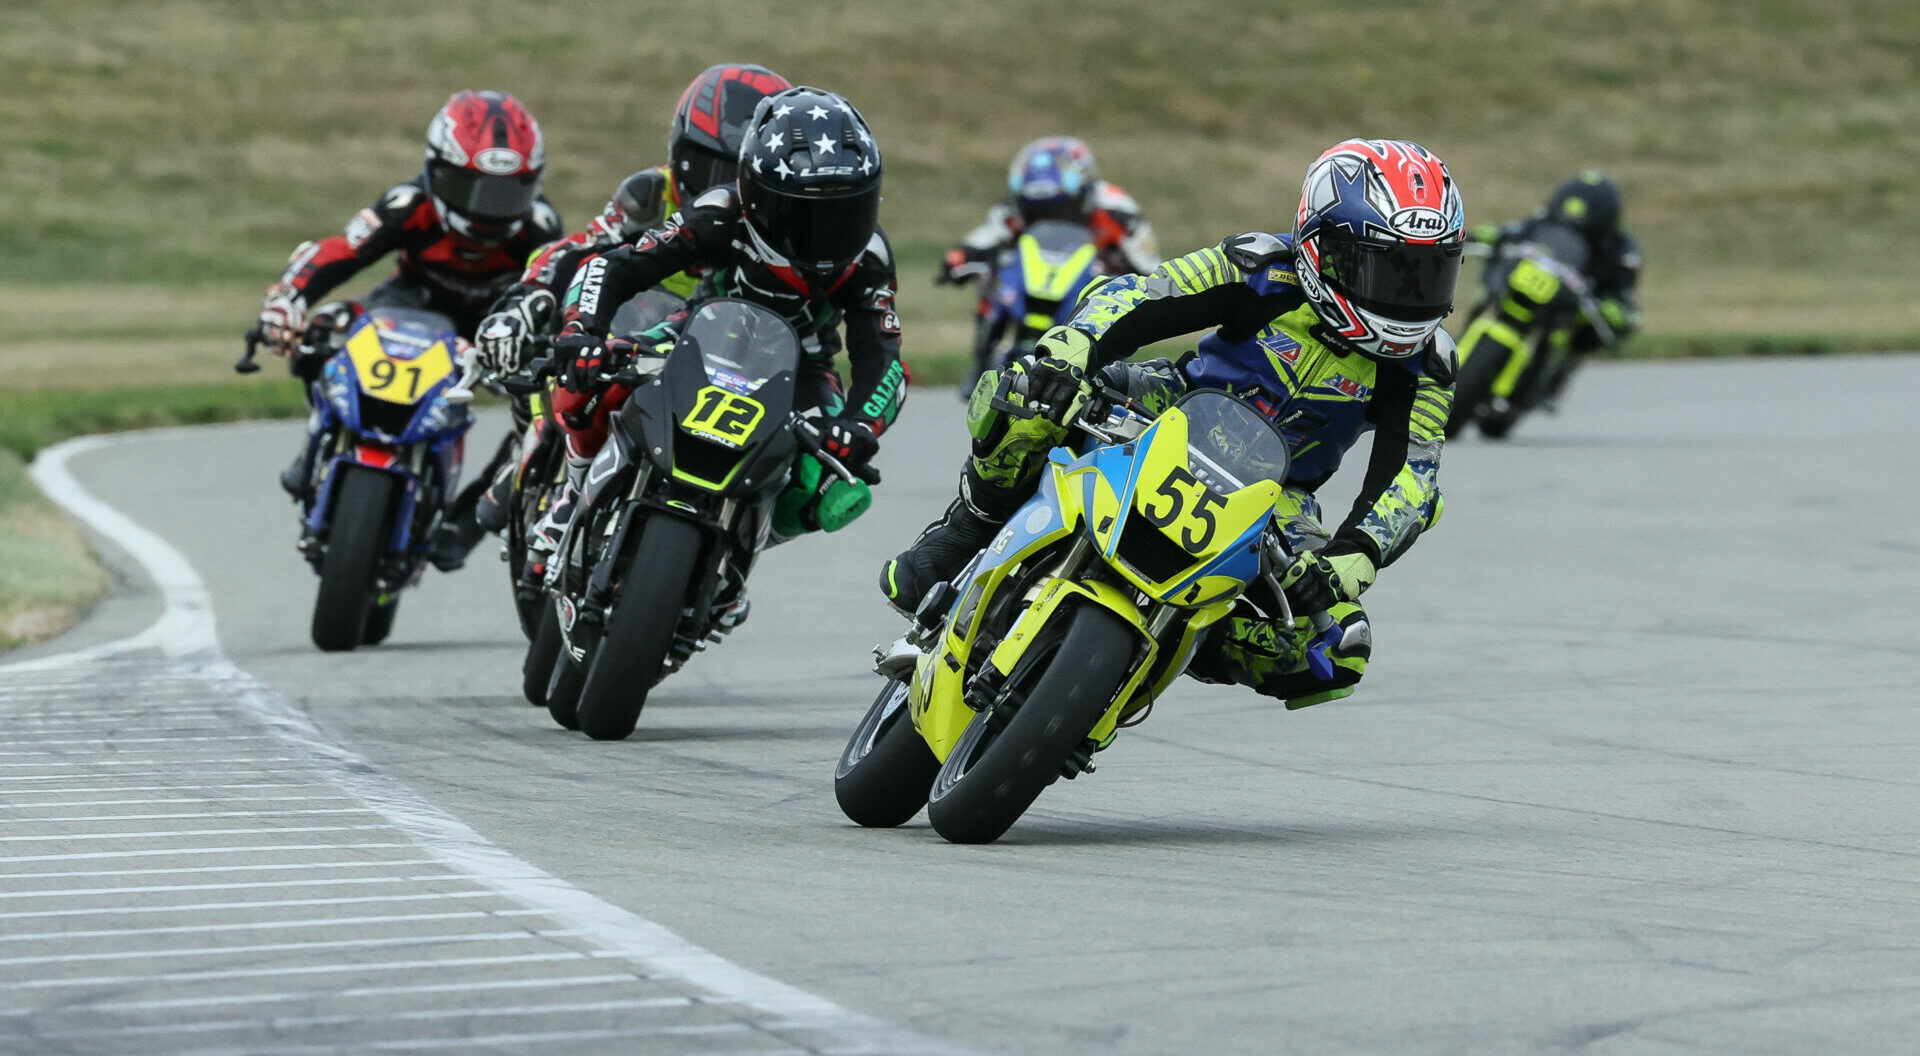 Ryder Davis (55) leads Anthony Lupo, Jr. (12) and the rest of the Mini Cup 160 field during a race at Pittsburgh International Race Complex in 2022. Photo by Brian J. Nelson.